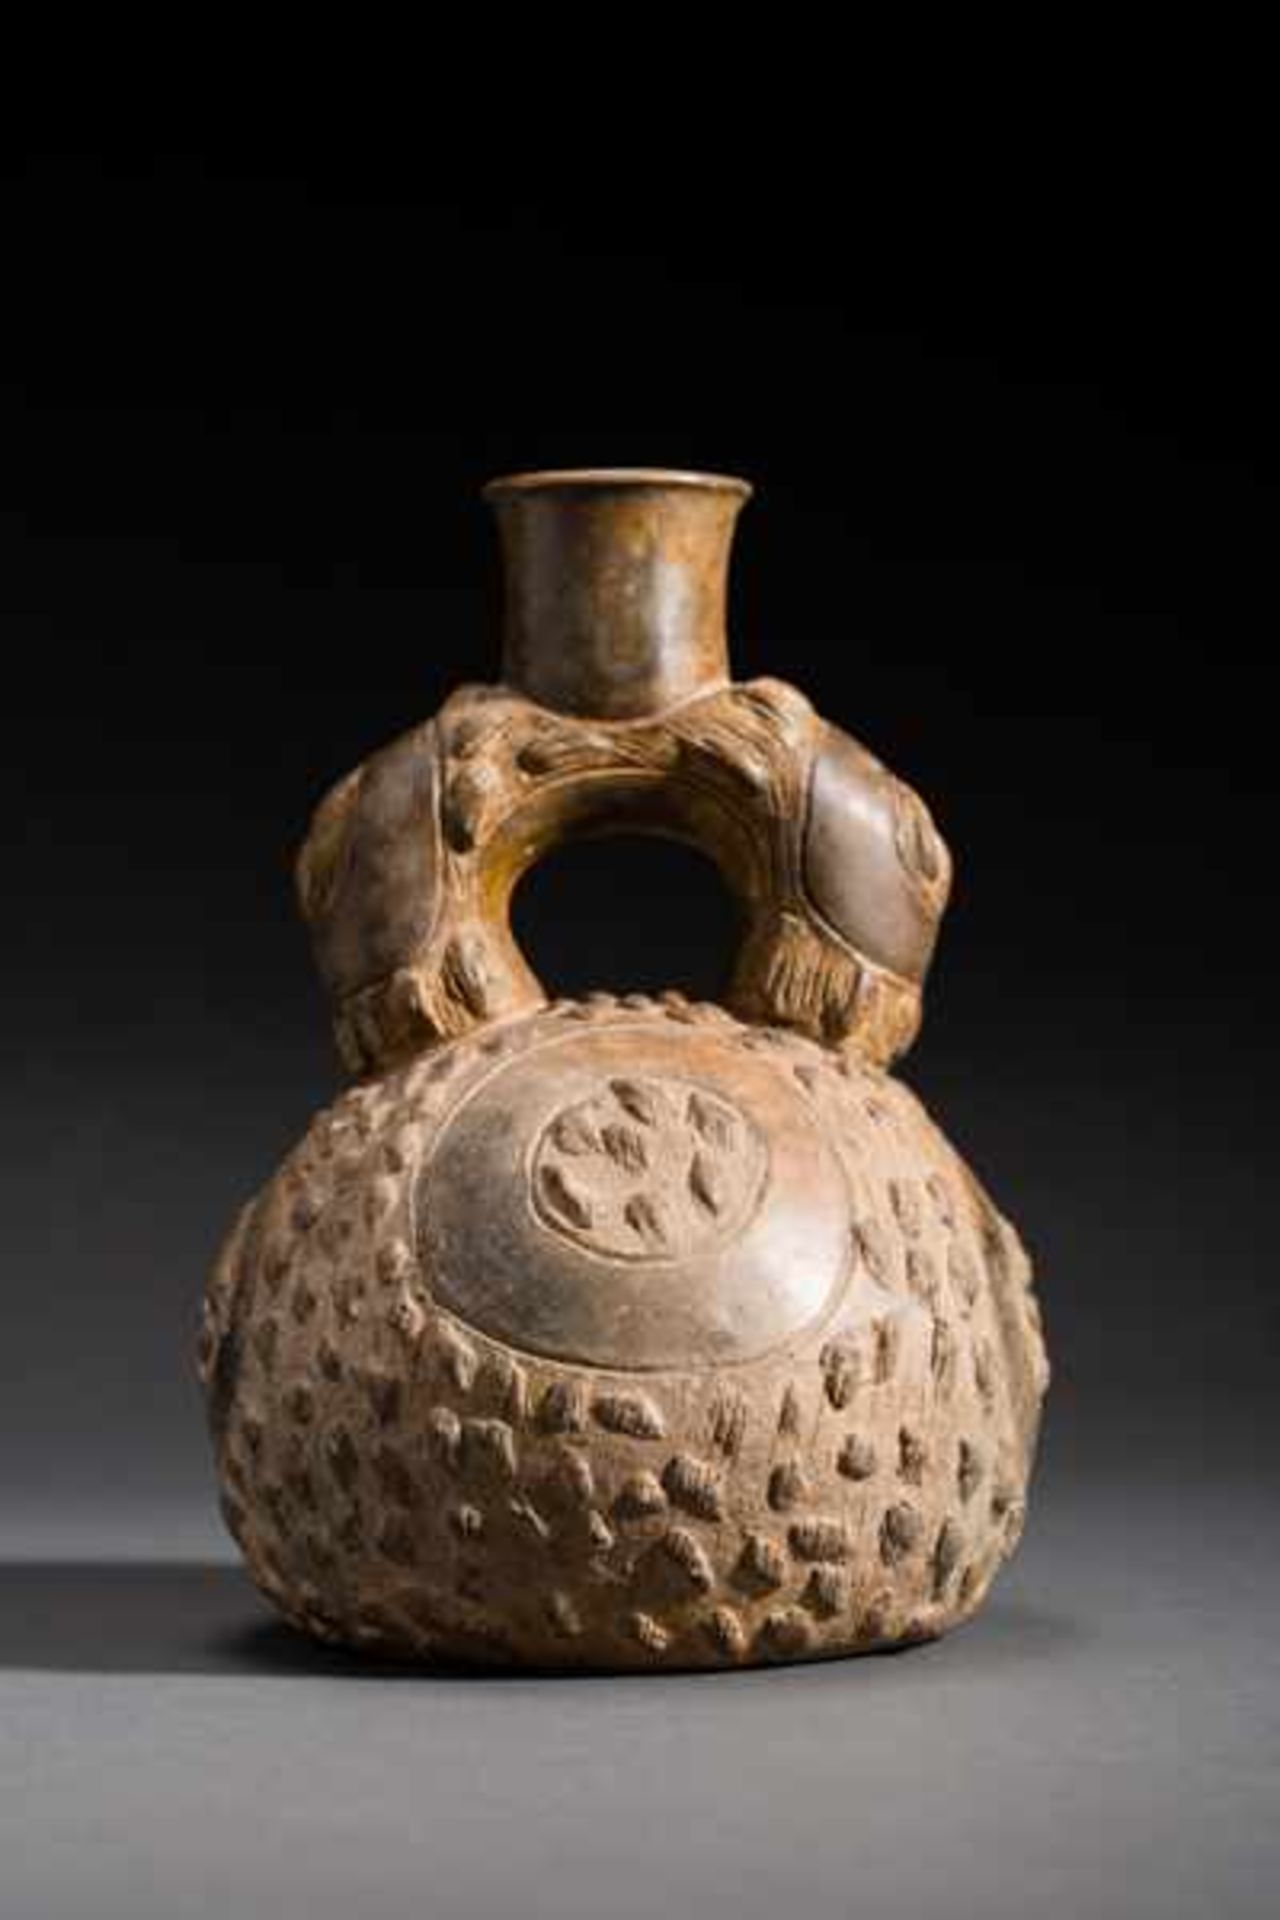 STIRRUP VESSEL WITH ETCHING AND NUBBED DECORATION Terracotta. Chavin, ca. 500 anteSpherical vessel